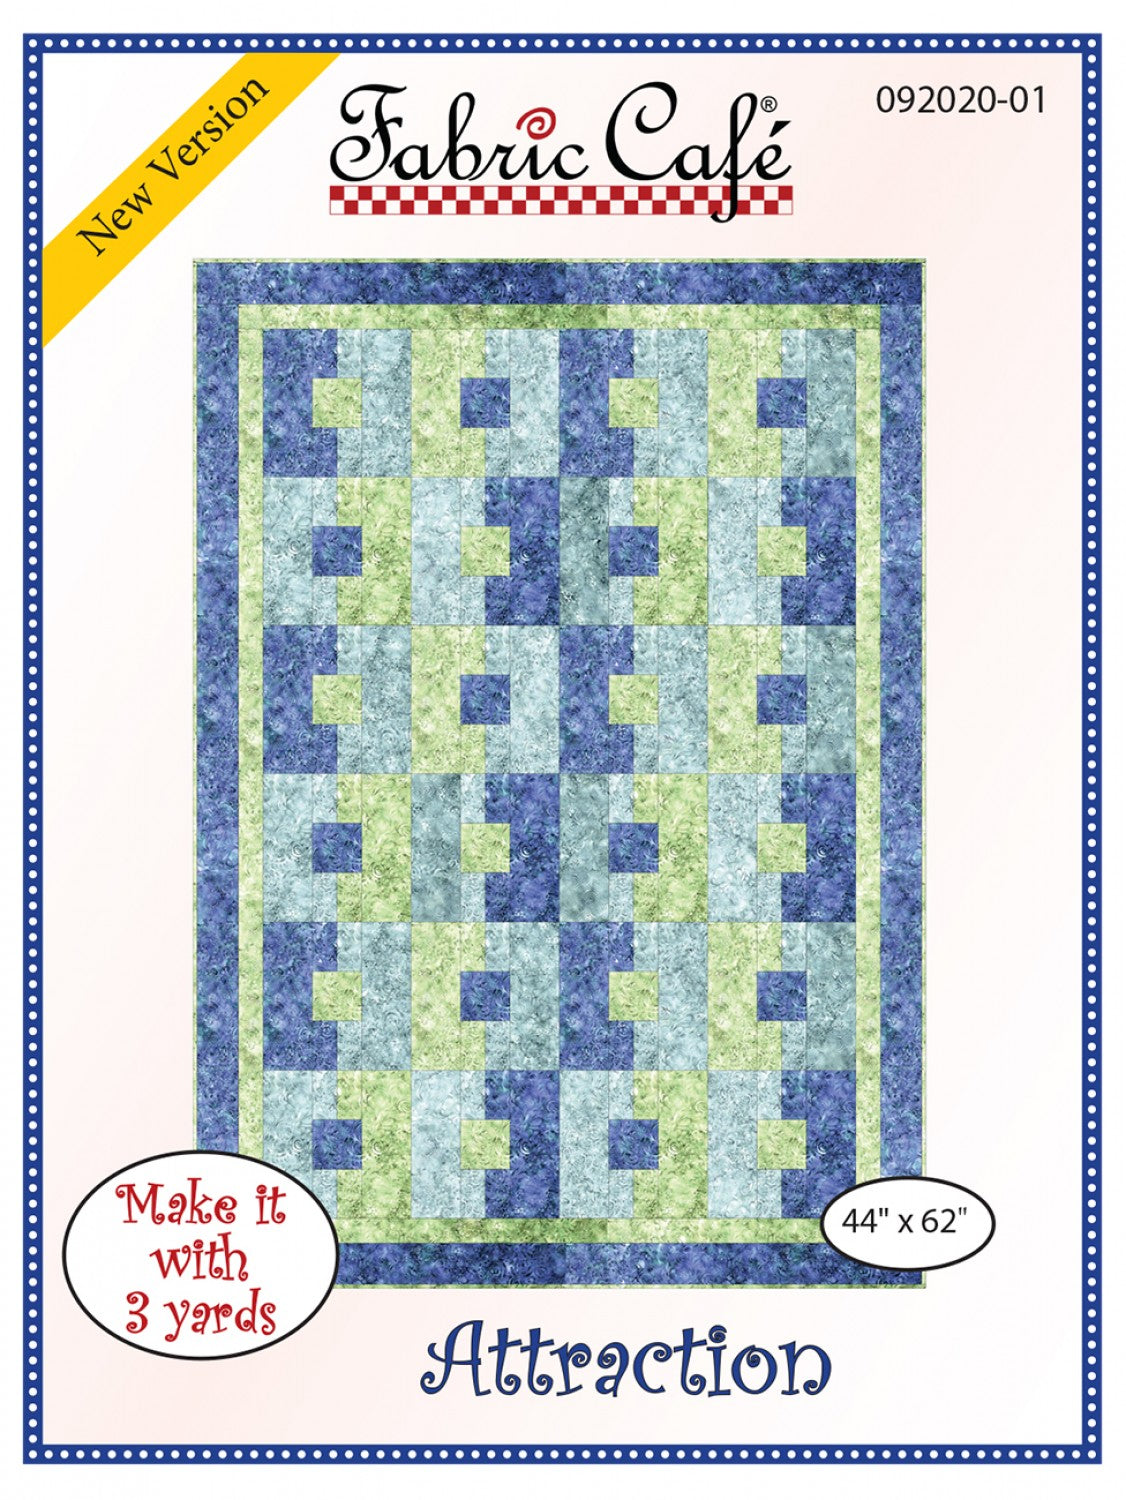 Attraction - Quilt Pattern - Fabric Cafe